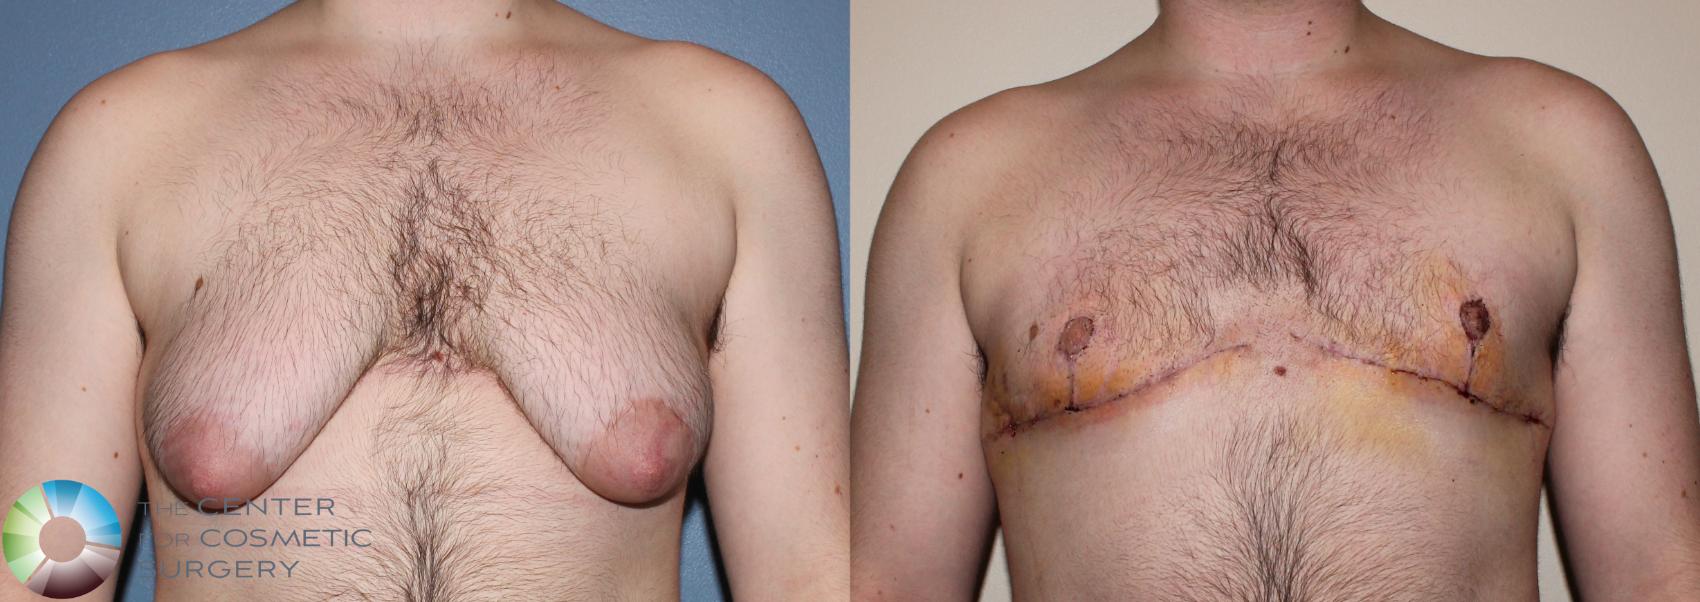 Before & After FTM Top Surgery/Chest Masculinization Case 11275 Front in Denver, CO